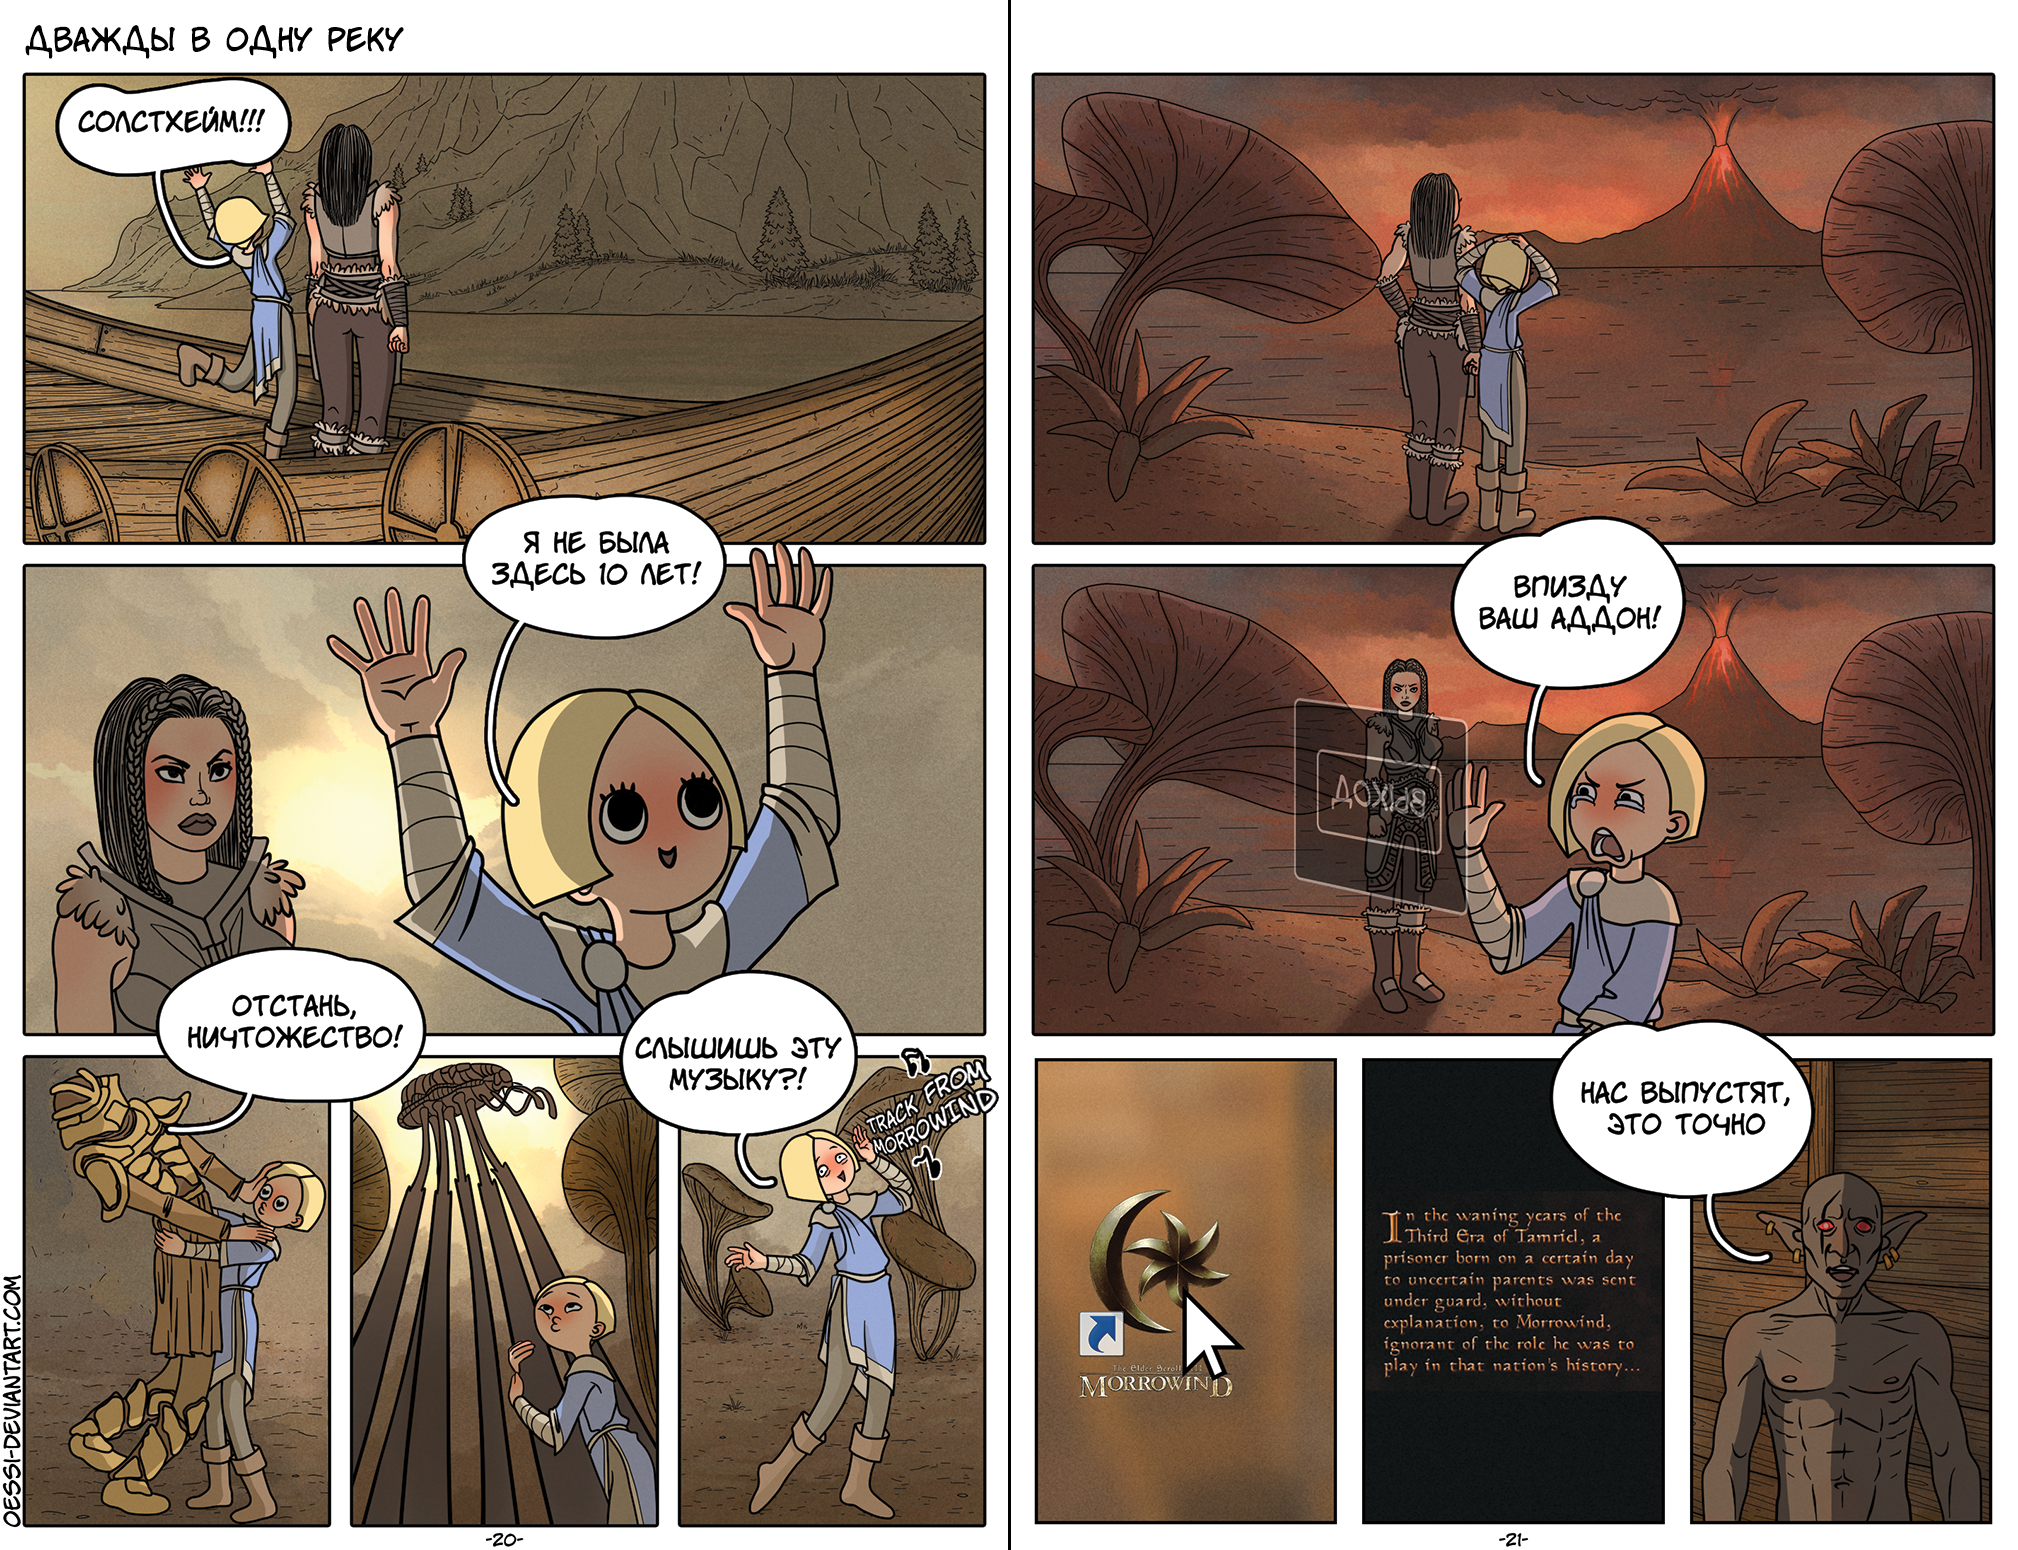 pages_20_21_by_oessi-dbyb647.png